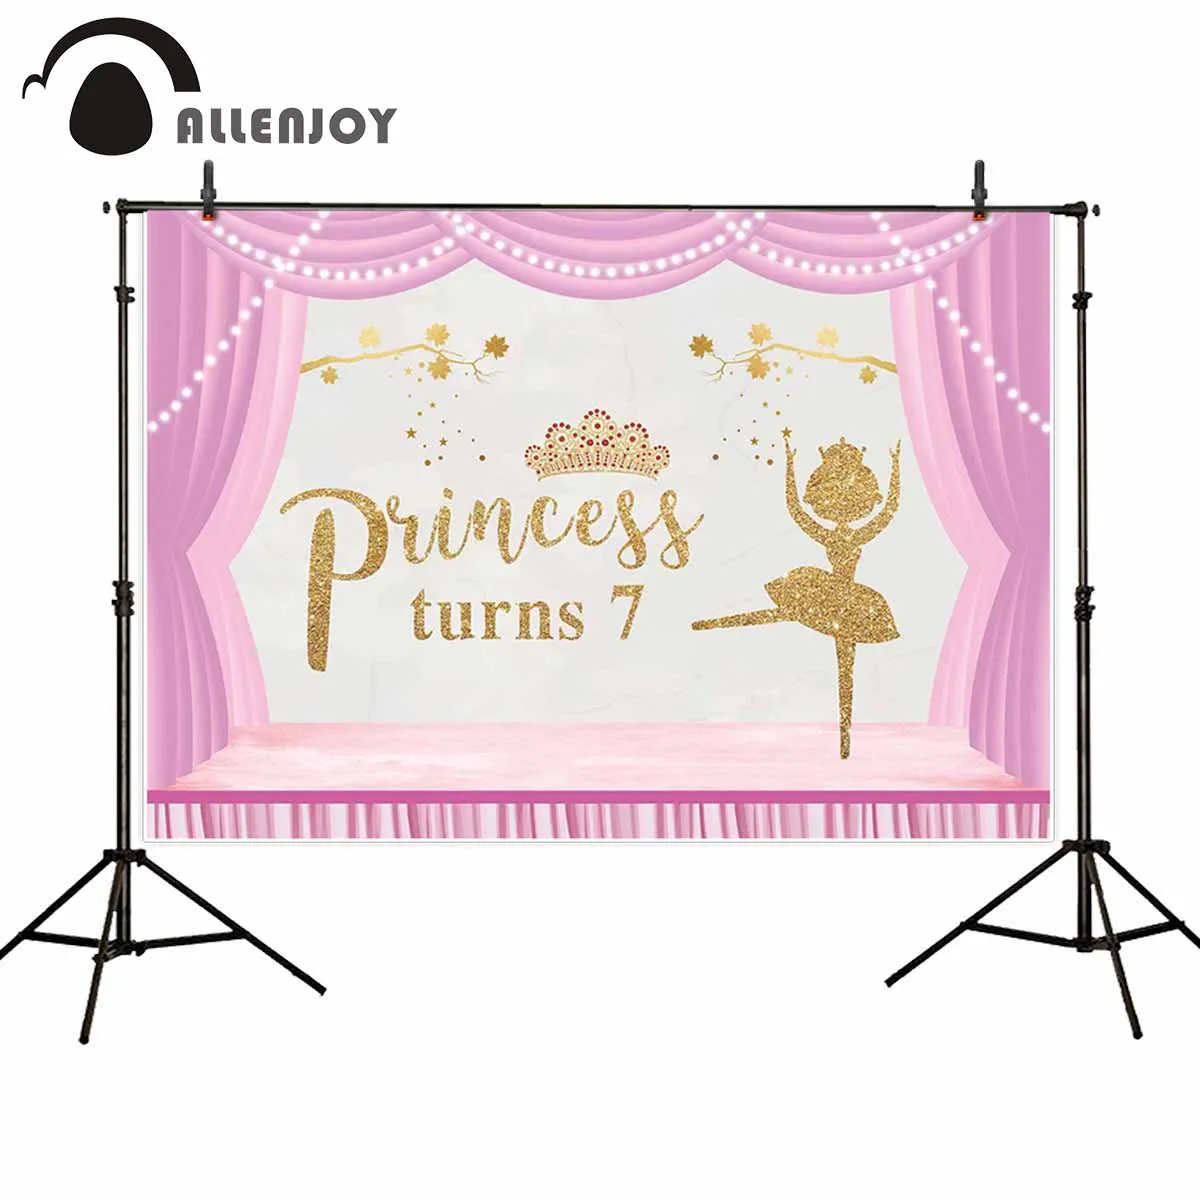 Muzi 7x5ft Happy Birthday Photography Backdrops Pink Curtain Gold Dancing Ballet Girl Background for Princess Baby Shower Cake Table Decorations Photo Booth Banner Studio Props W-3382